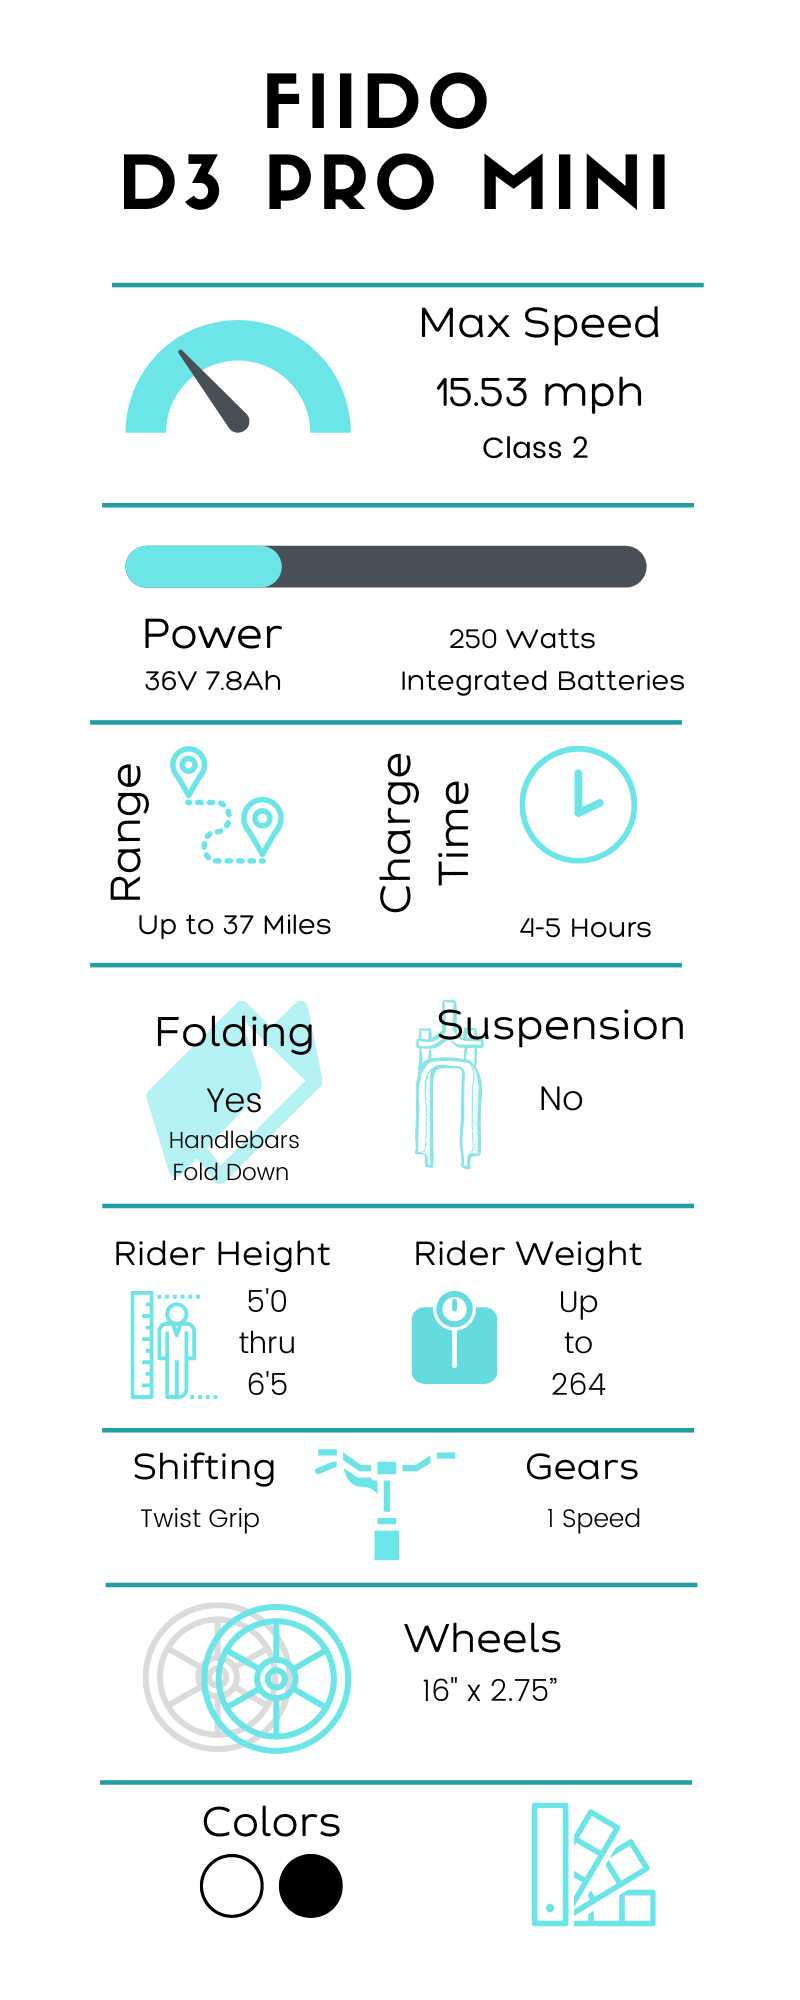 Infographic about the Fiido D3 Pro eBike from Fiido that is compatible with the Go4-E Connection Kit to create a Blackbird Bikes Sociable Tandem side-by-side quadribike. This 4 wheel bicycle offers a stable ride inclusive for all abilities and adaptive to special needs riders.